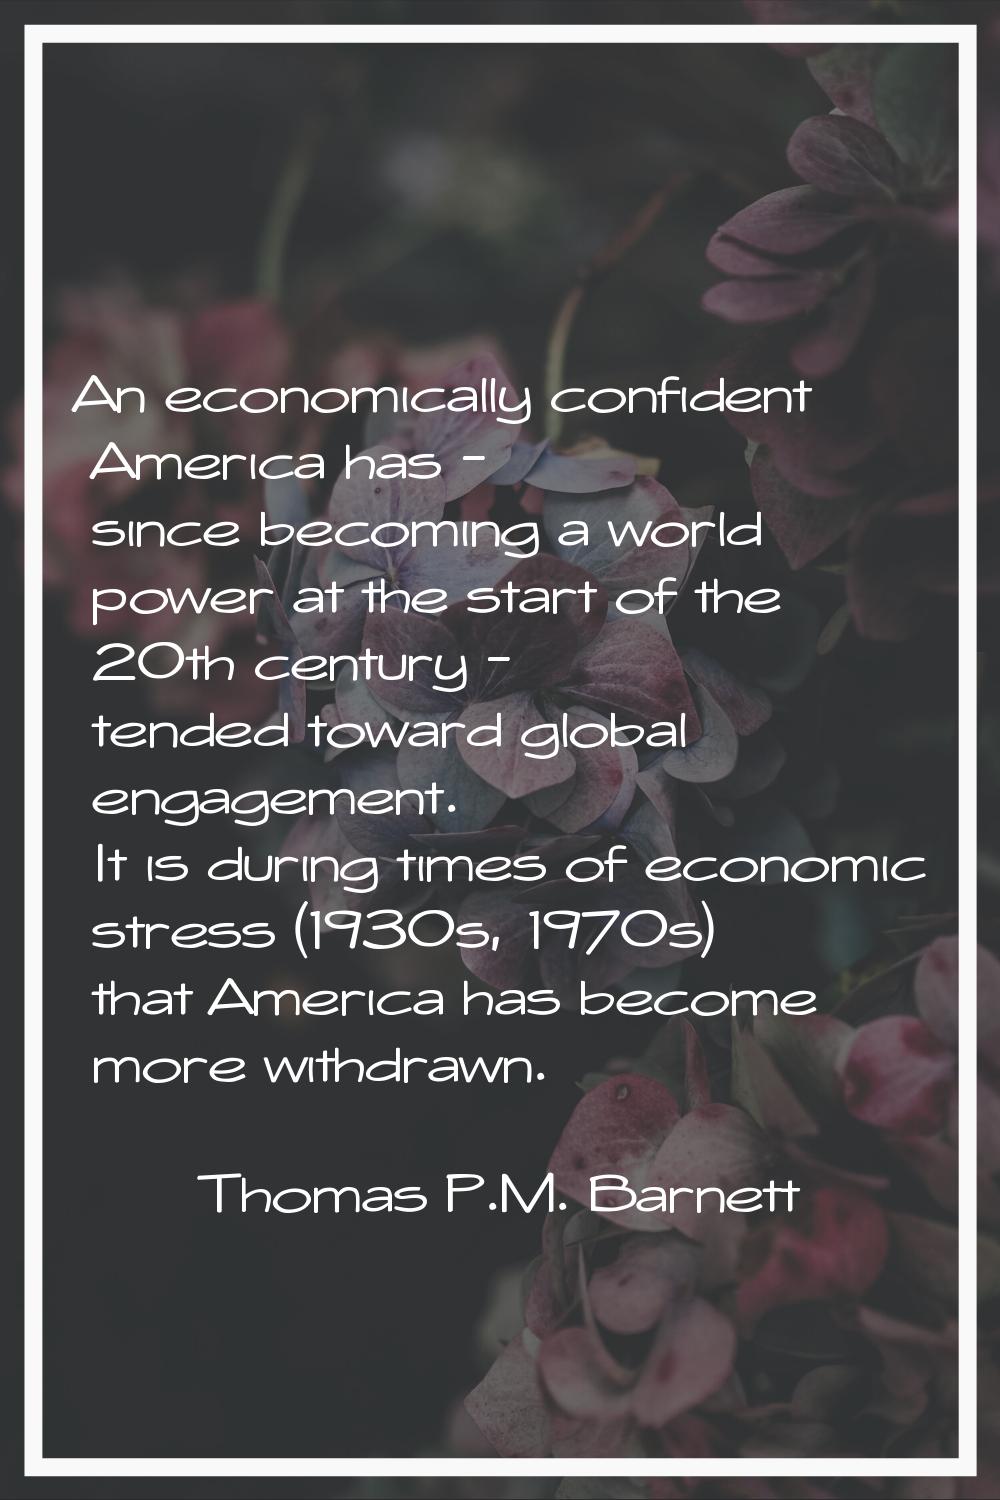 An economically confident America has - since becoming a world power at the start of the 20th centu